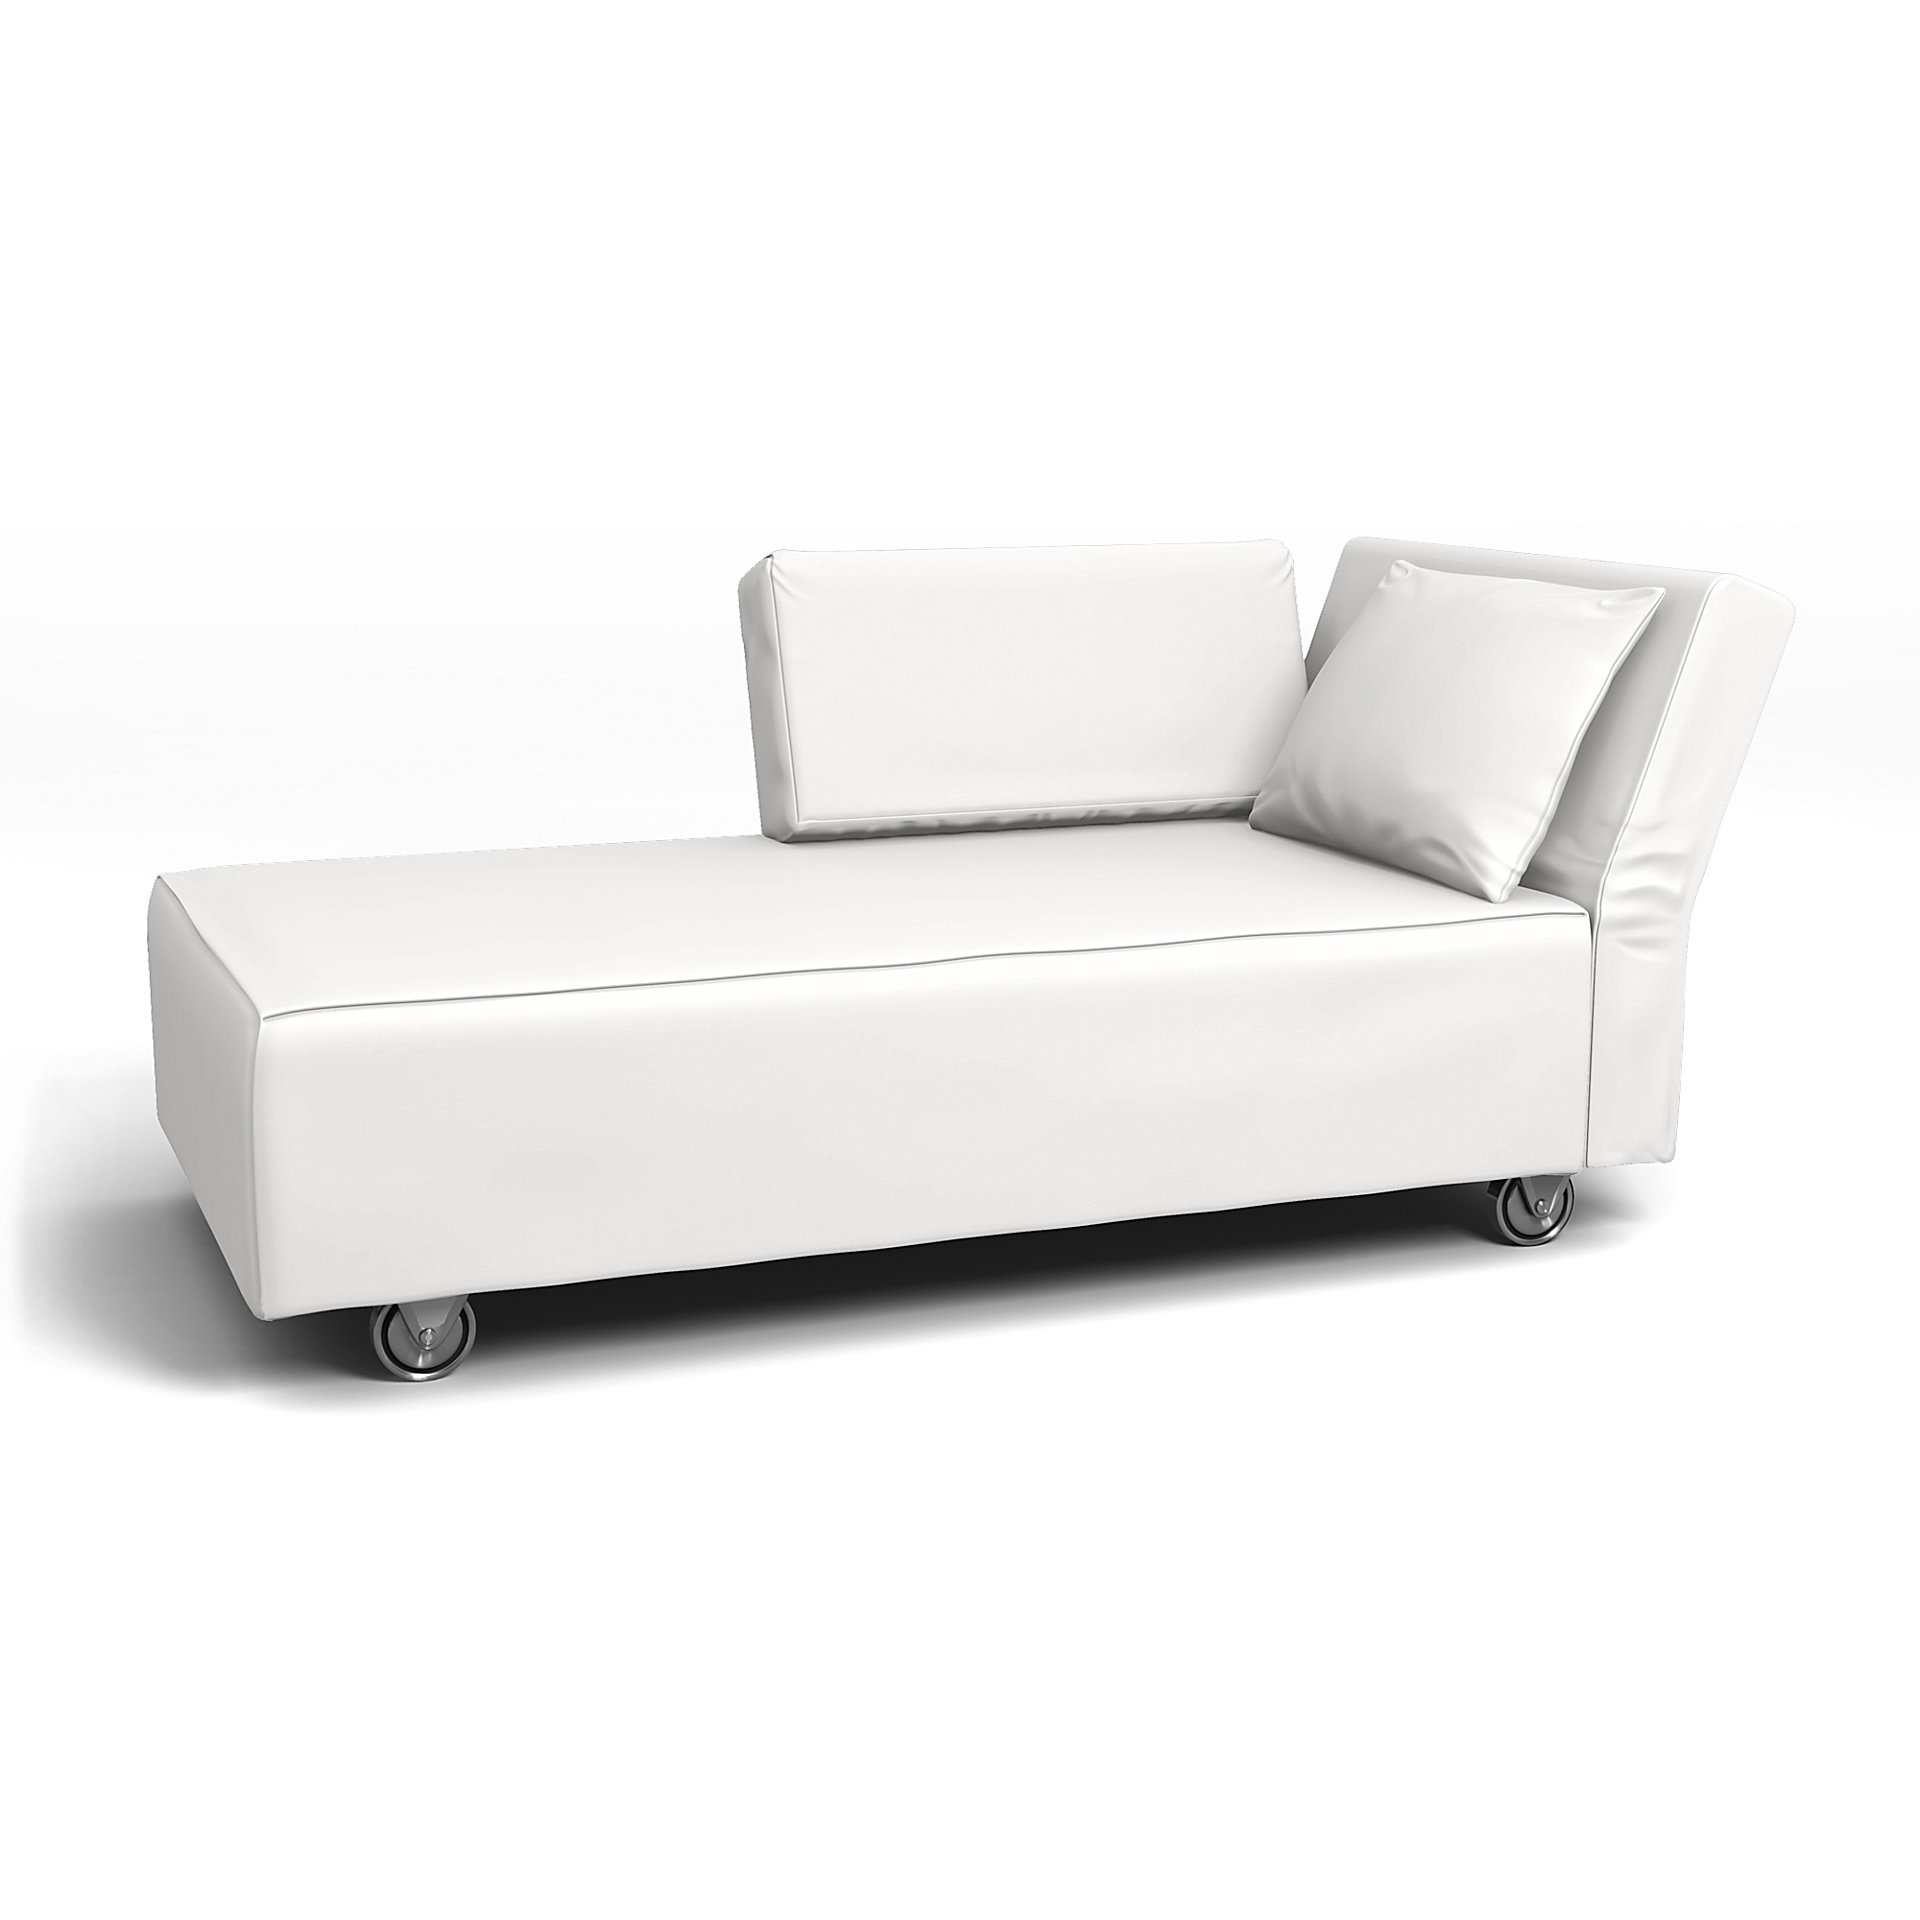 IKEA - Falsterbo Chaise with Right Armrest Cover, Absolute White, Cotton - Bemz